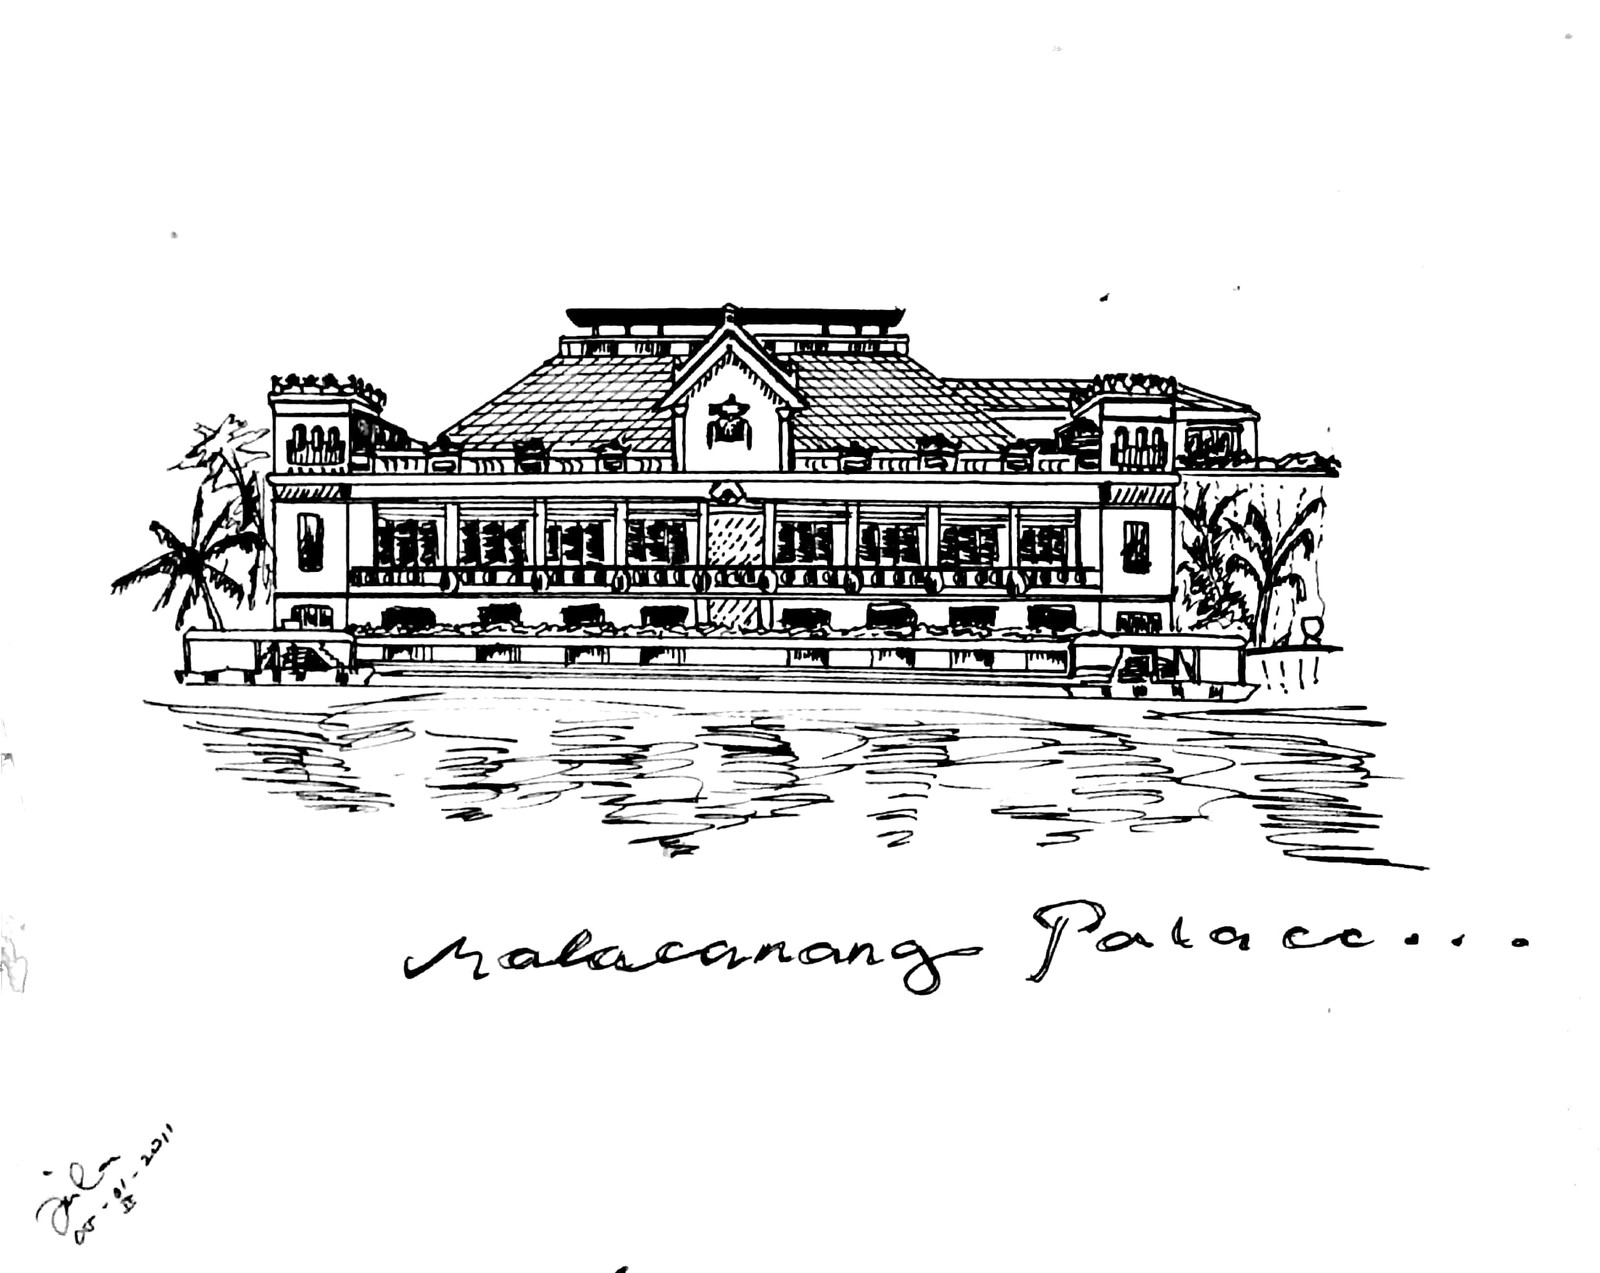 A fast sketch of Philippine's Malacañang Palace with the 20-peso bill as a reference.

May 1, 2011